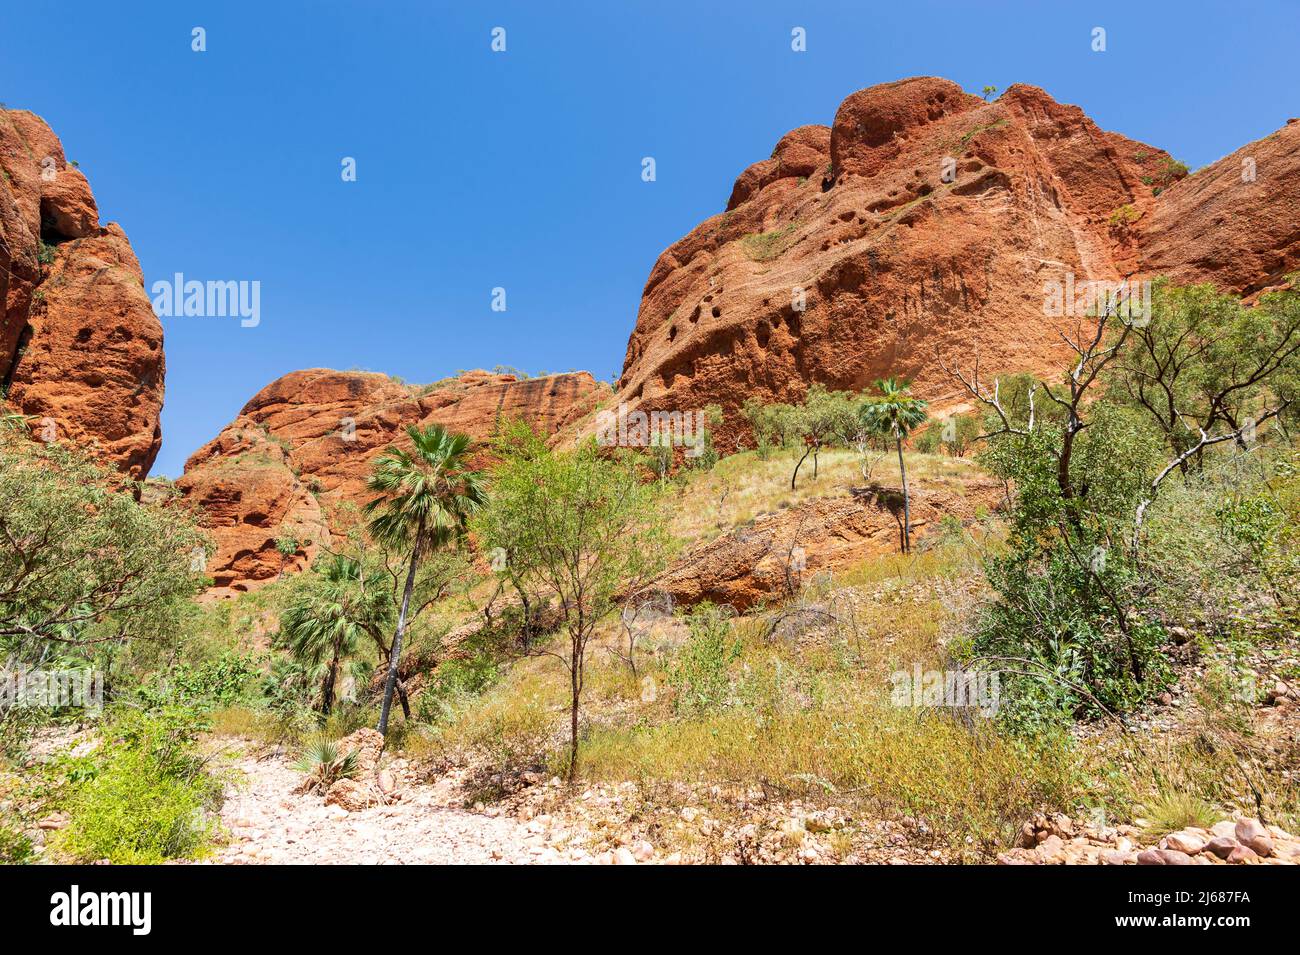 Spectacular view of Livistona Palms against sandstone karst at Purnululu National Park or Bungle Bungles, a Unesco World Heritage site in the Kimberle Stock Photo